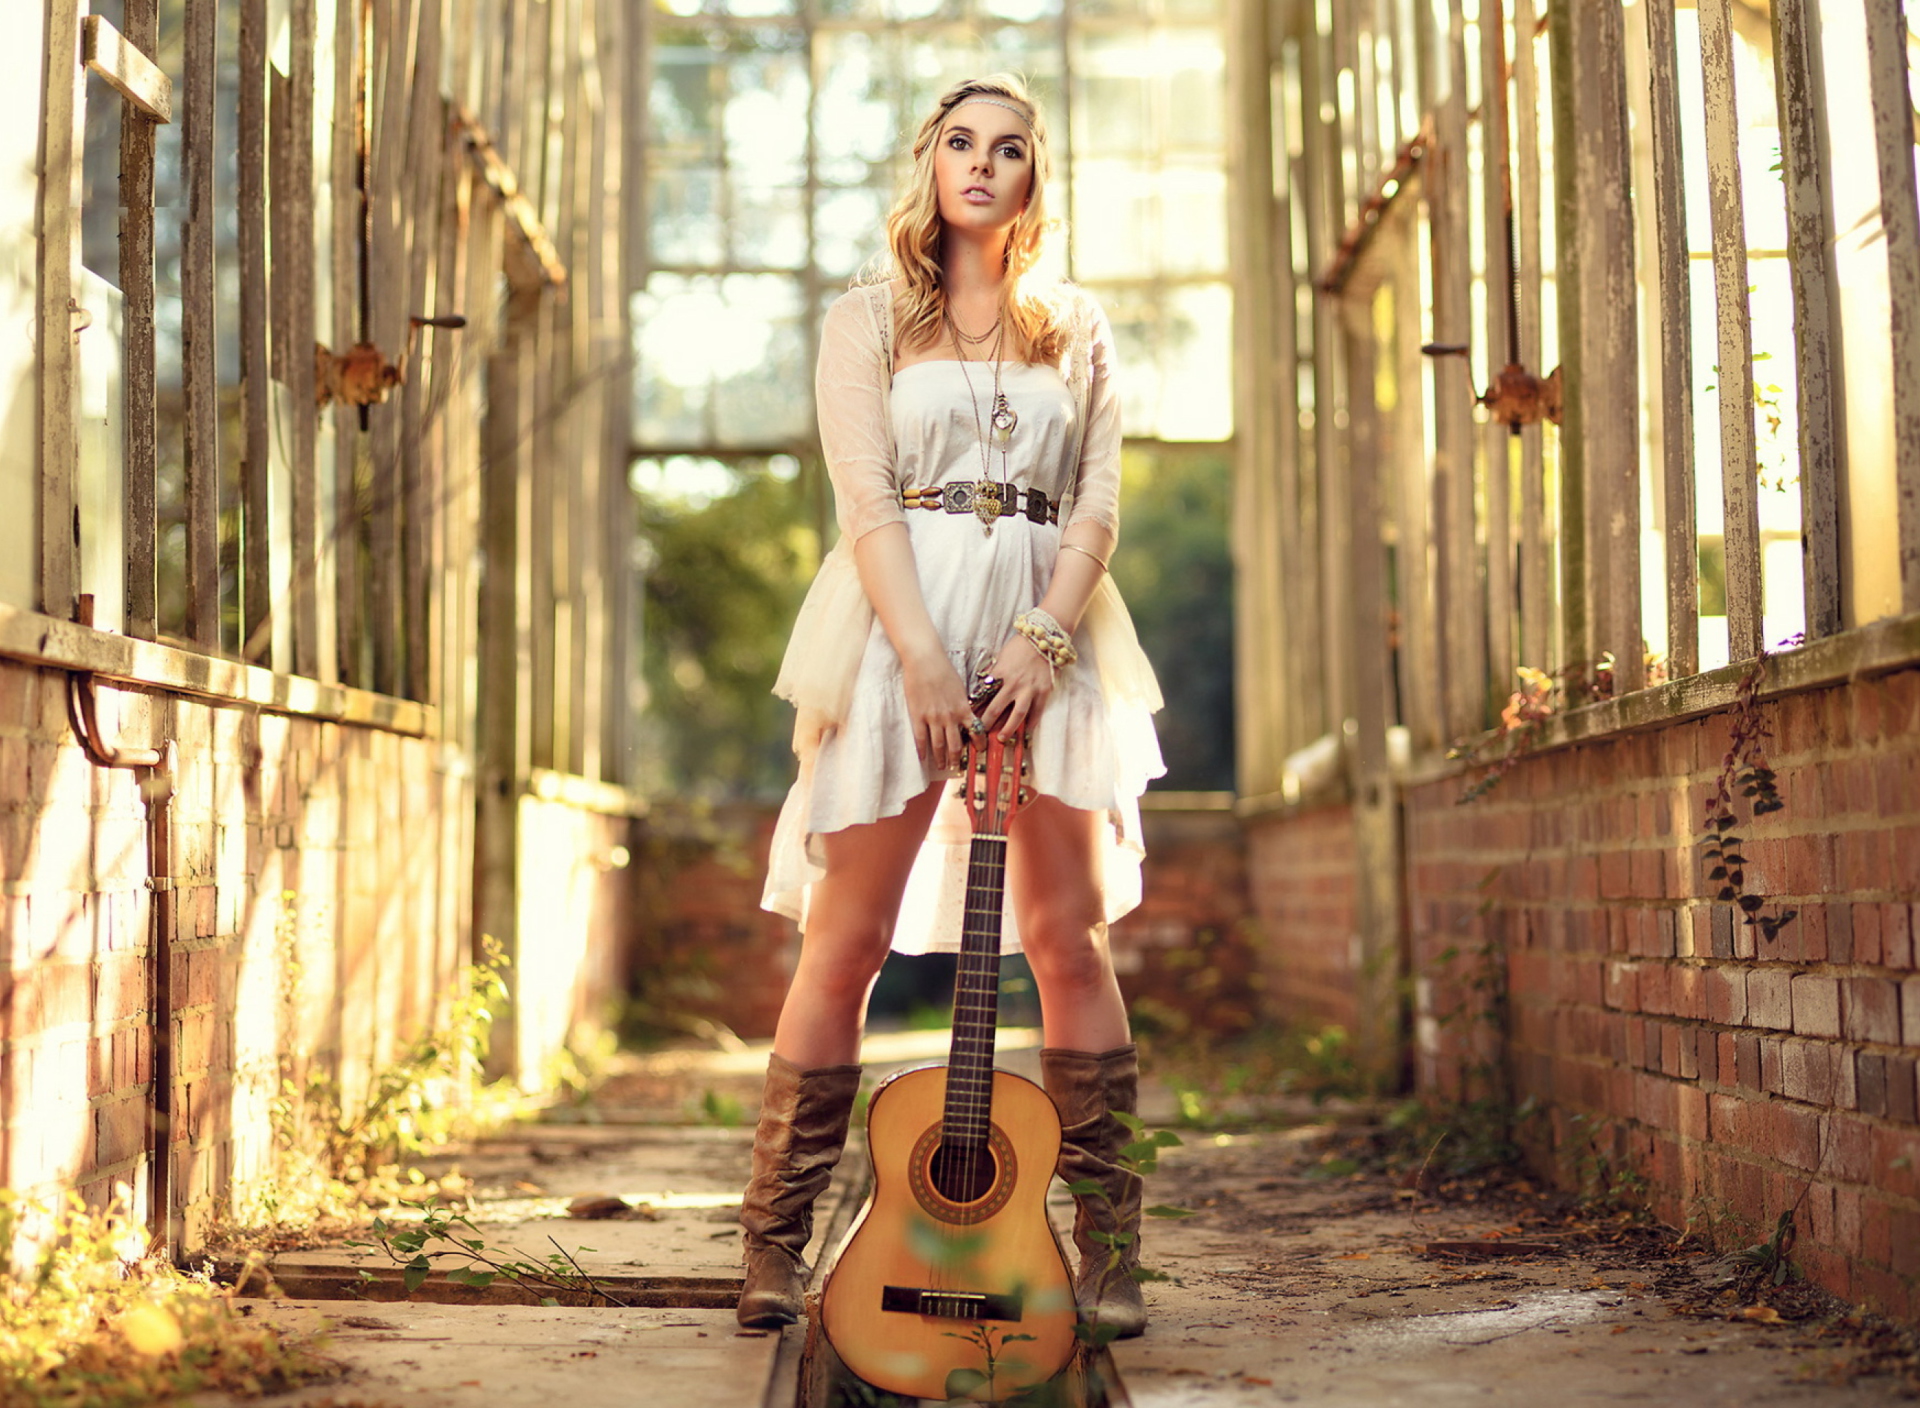 Girl With Guitar Chic Country Style screenshot #1 1920x1408